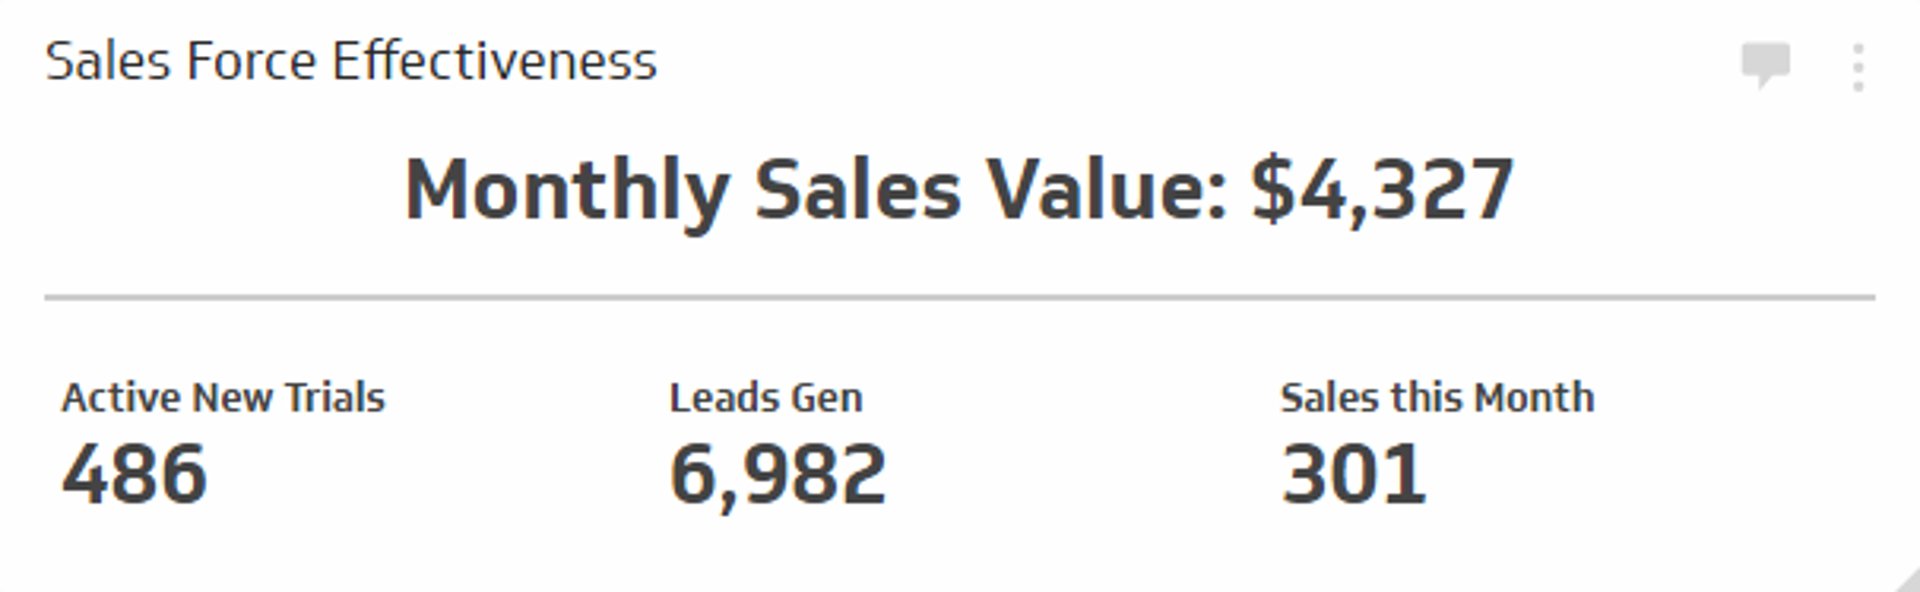 Related KPI Examples - Sales Force Effectiveness Metric